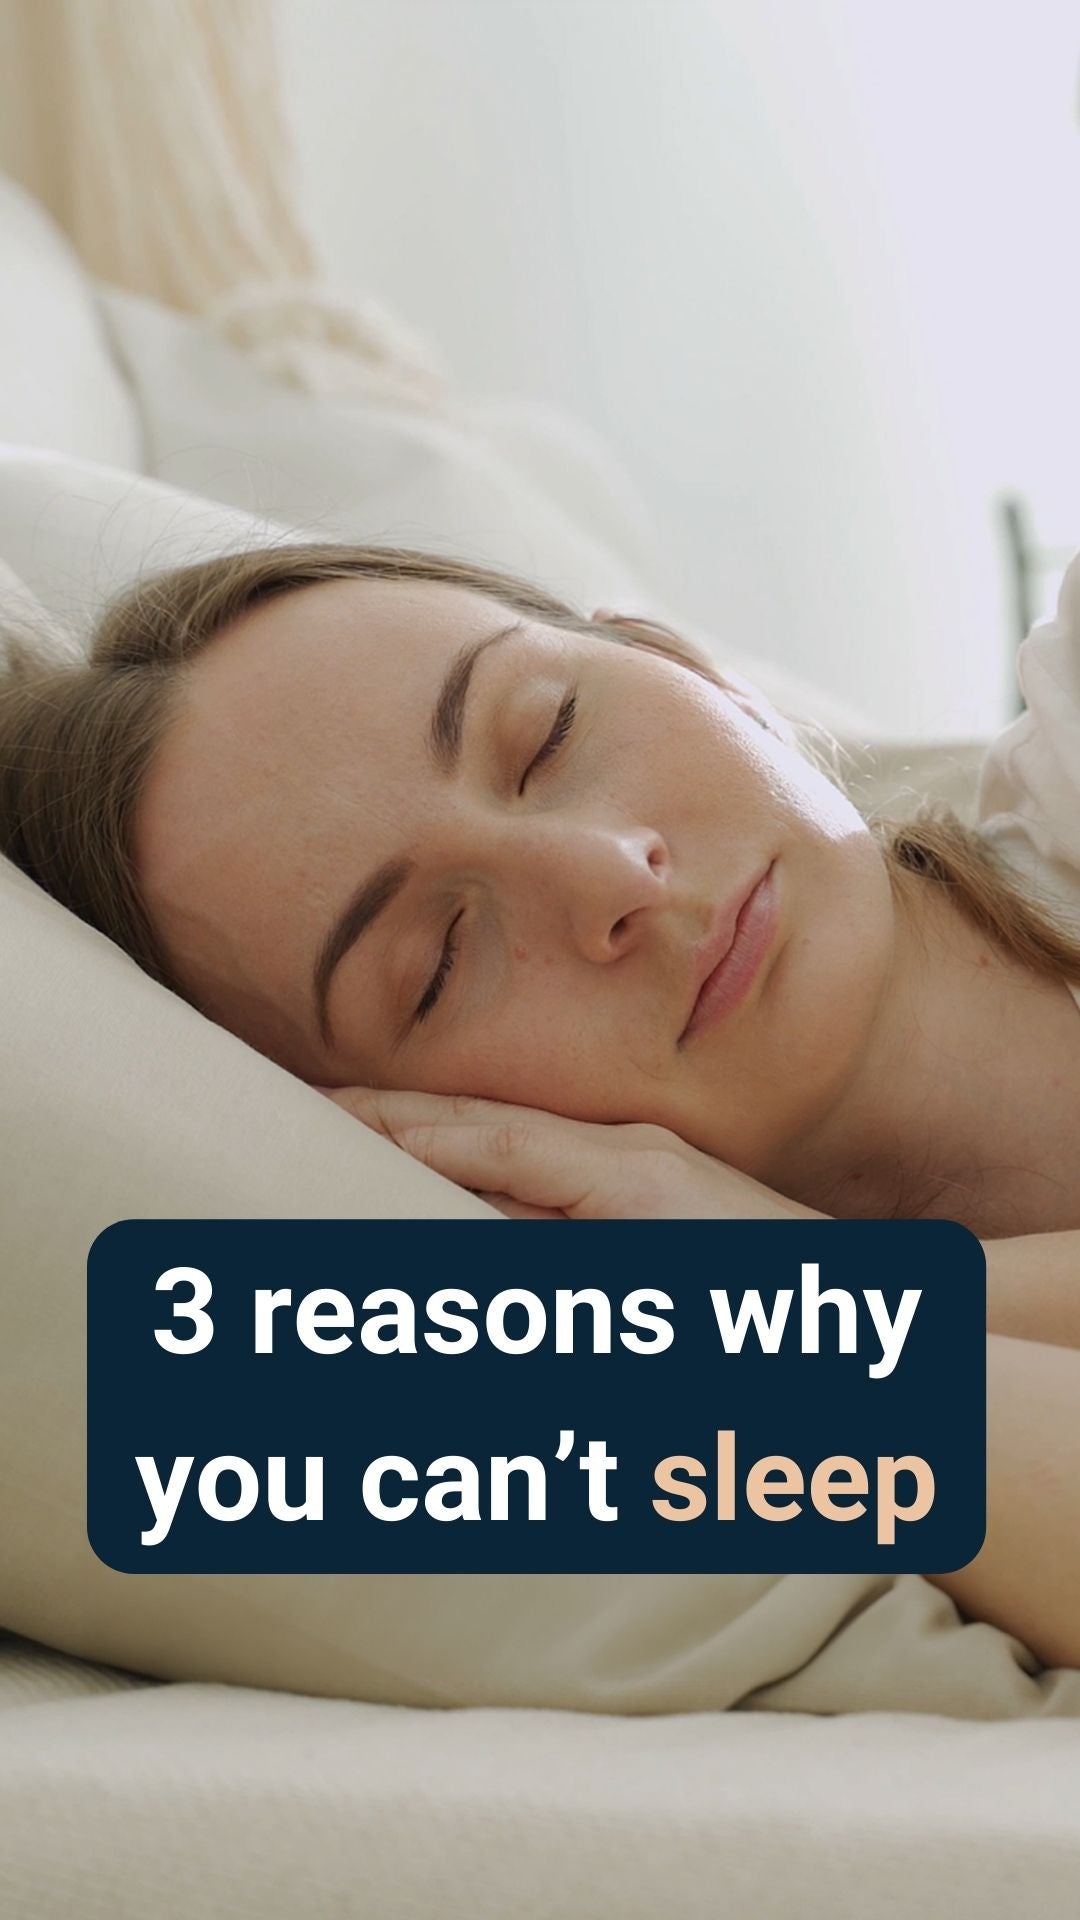 A lady asleep in bed, with the caption '3 reasons you can't sleep'